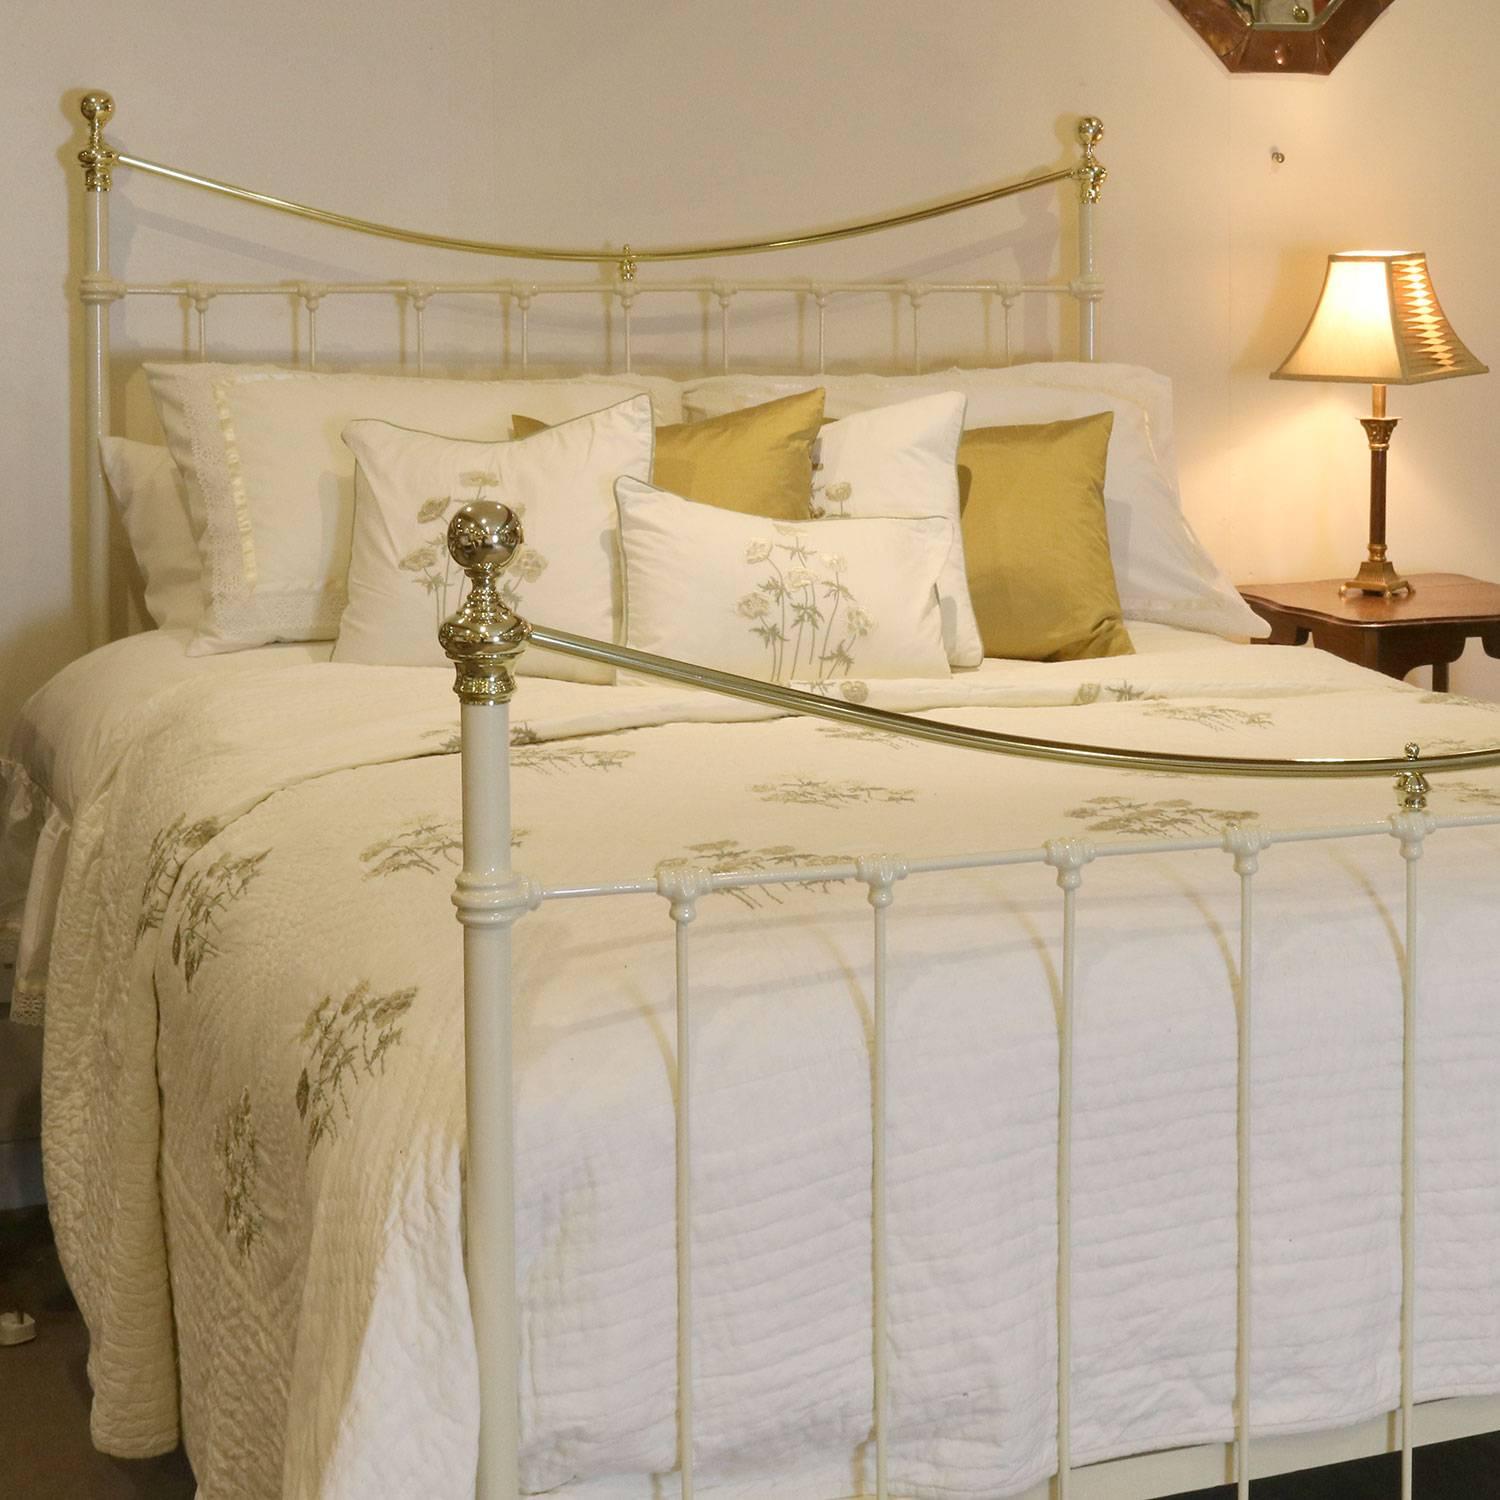 A brass and iron bed finished in cream with a curved brass top rail and simple castings.

This bed accepts an American Queen or British king-size (60 inches, 5ft or 150cm) base and mattress set.

The price is for the bed frame alone. The base,